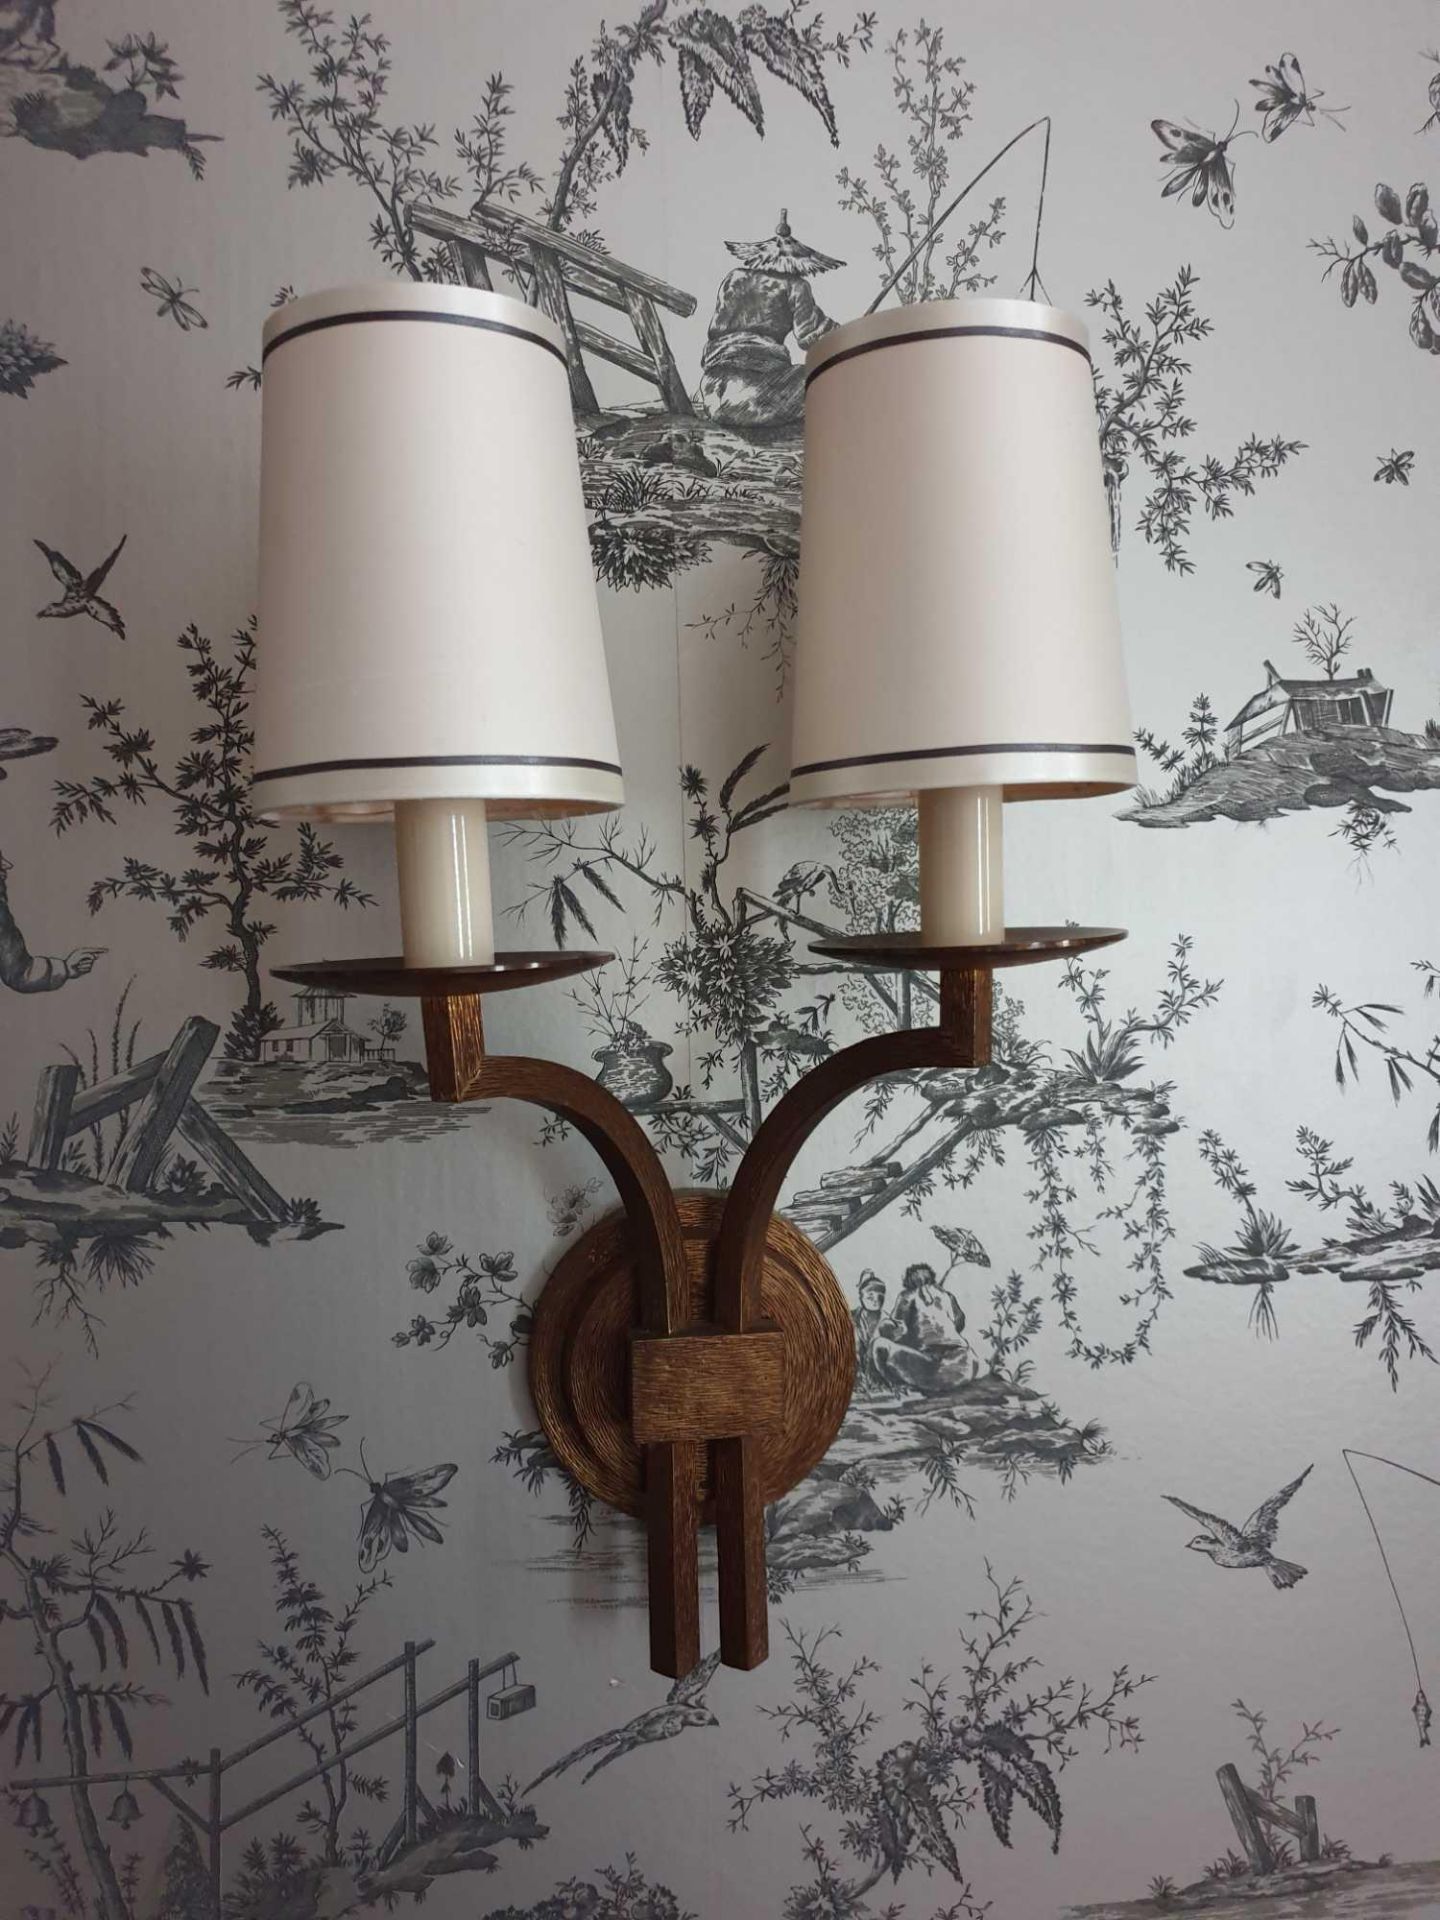 A Pair Of Dernier And Hamlyn Twin Arm Antique Bronzed Wall Sconces With Shade 51cm (Room 706 707)